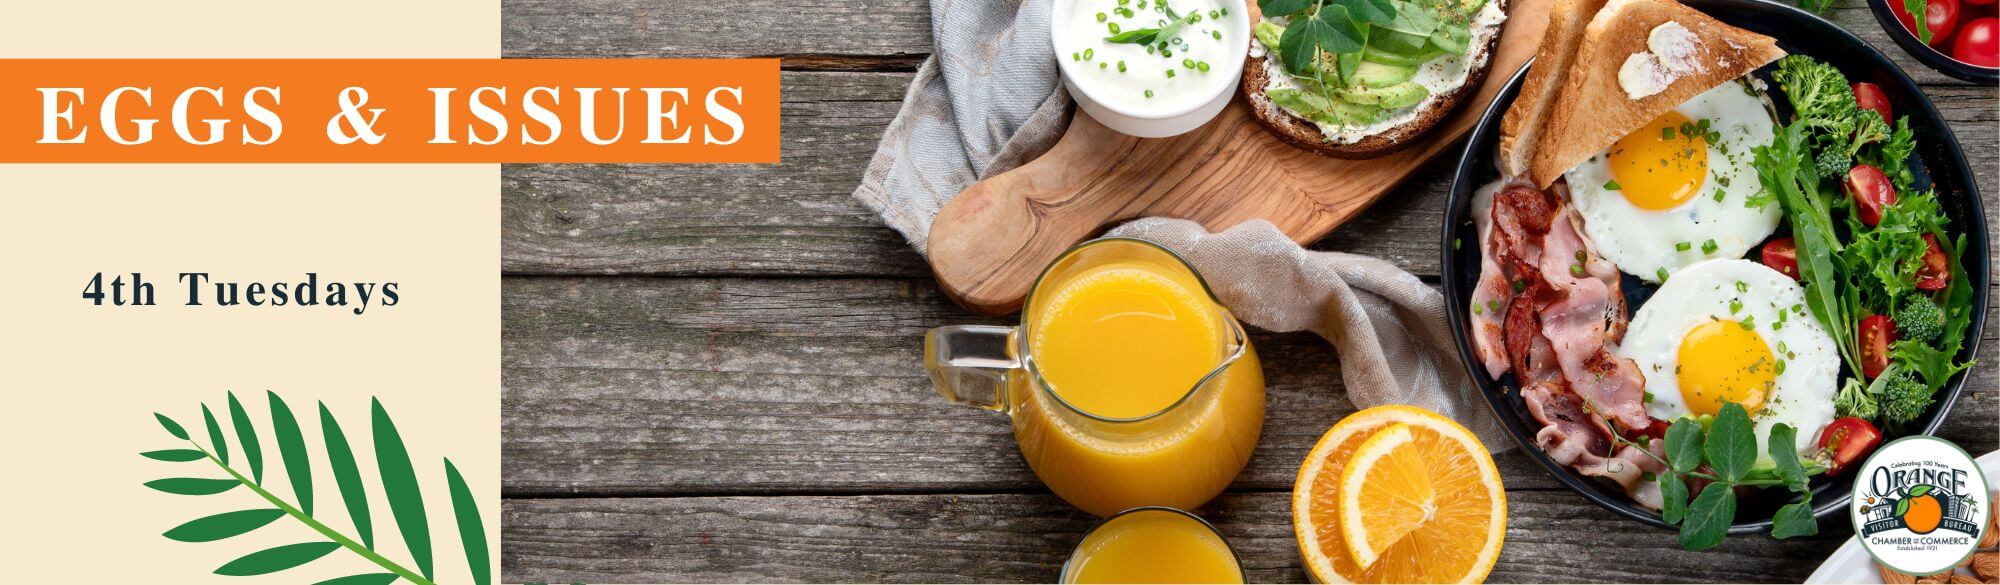 Orange Chamber of Commerce Eggs and Issues Website Banner